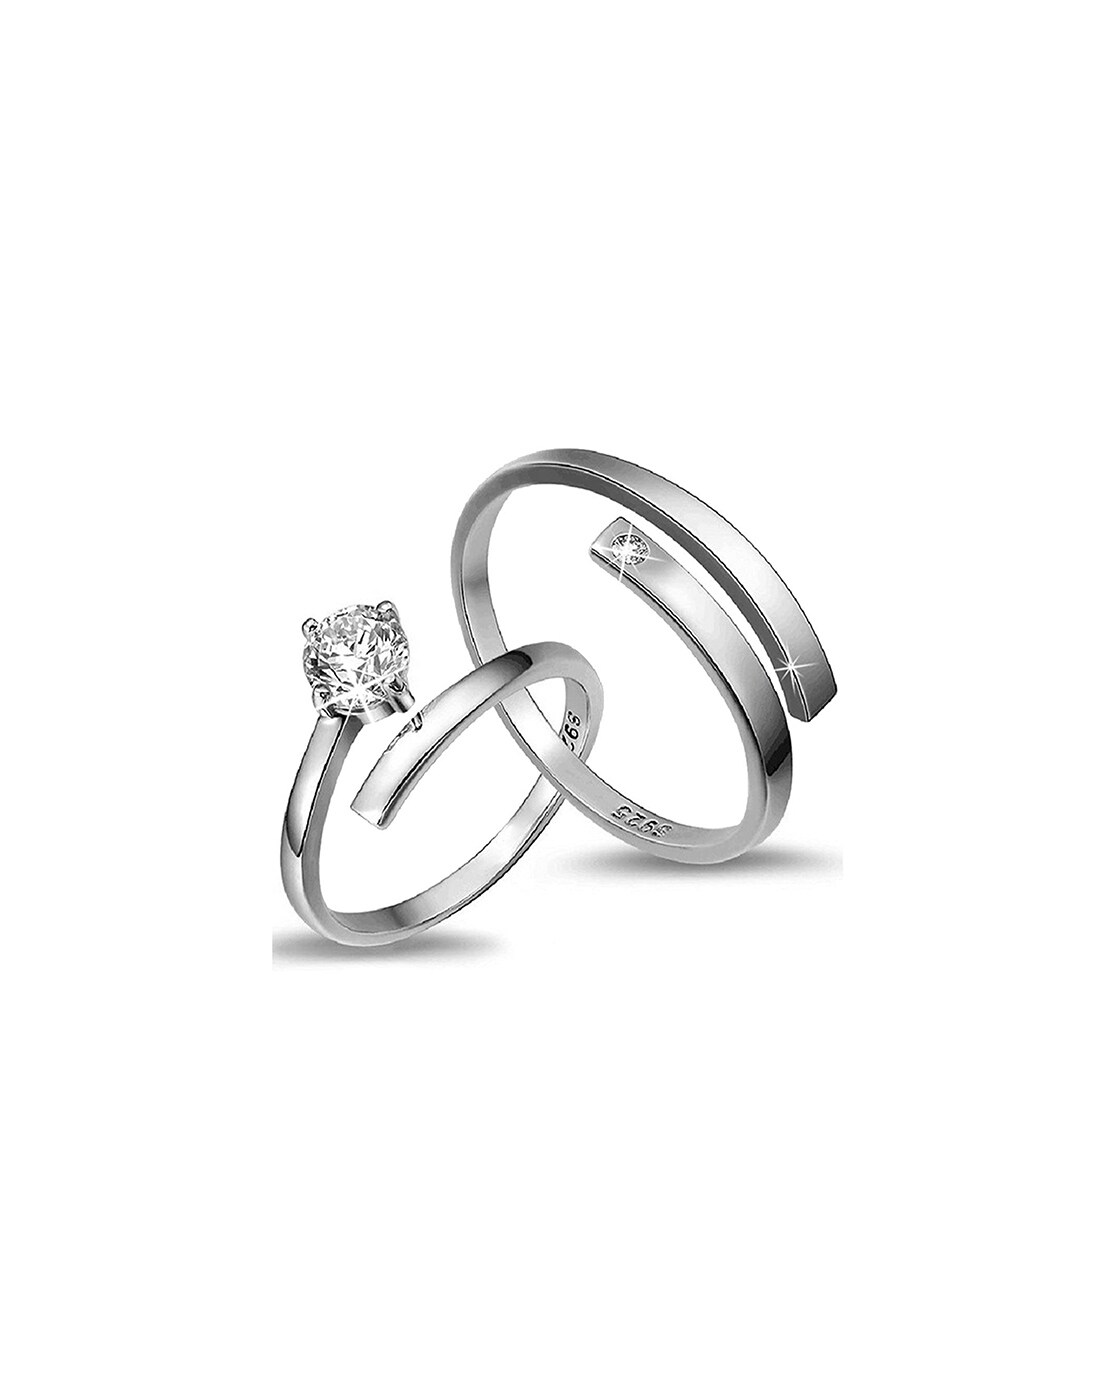 Buy Gold & Silver Rings for Women by Pinapes Online | Ajio.com